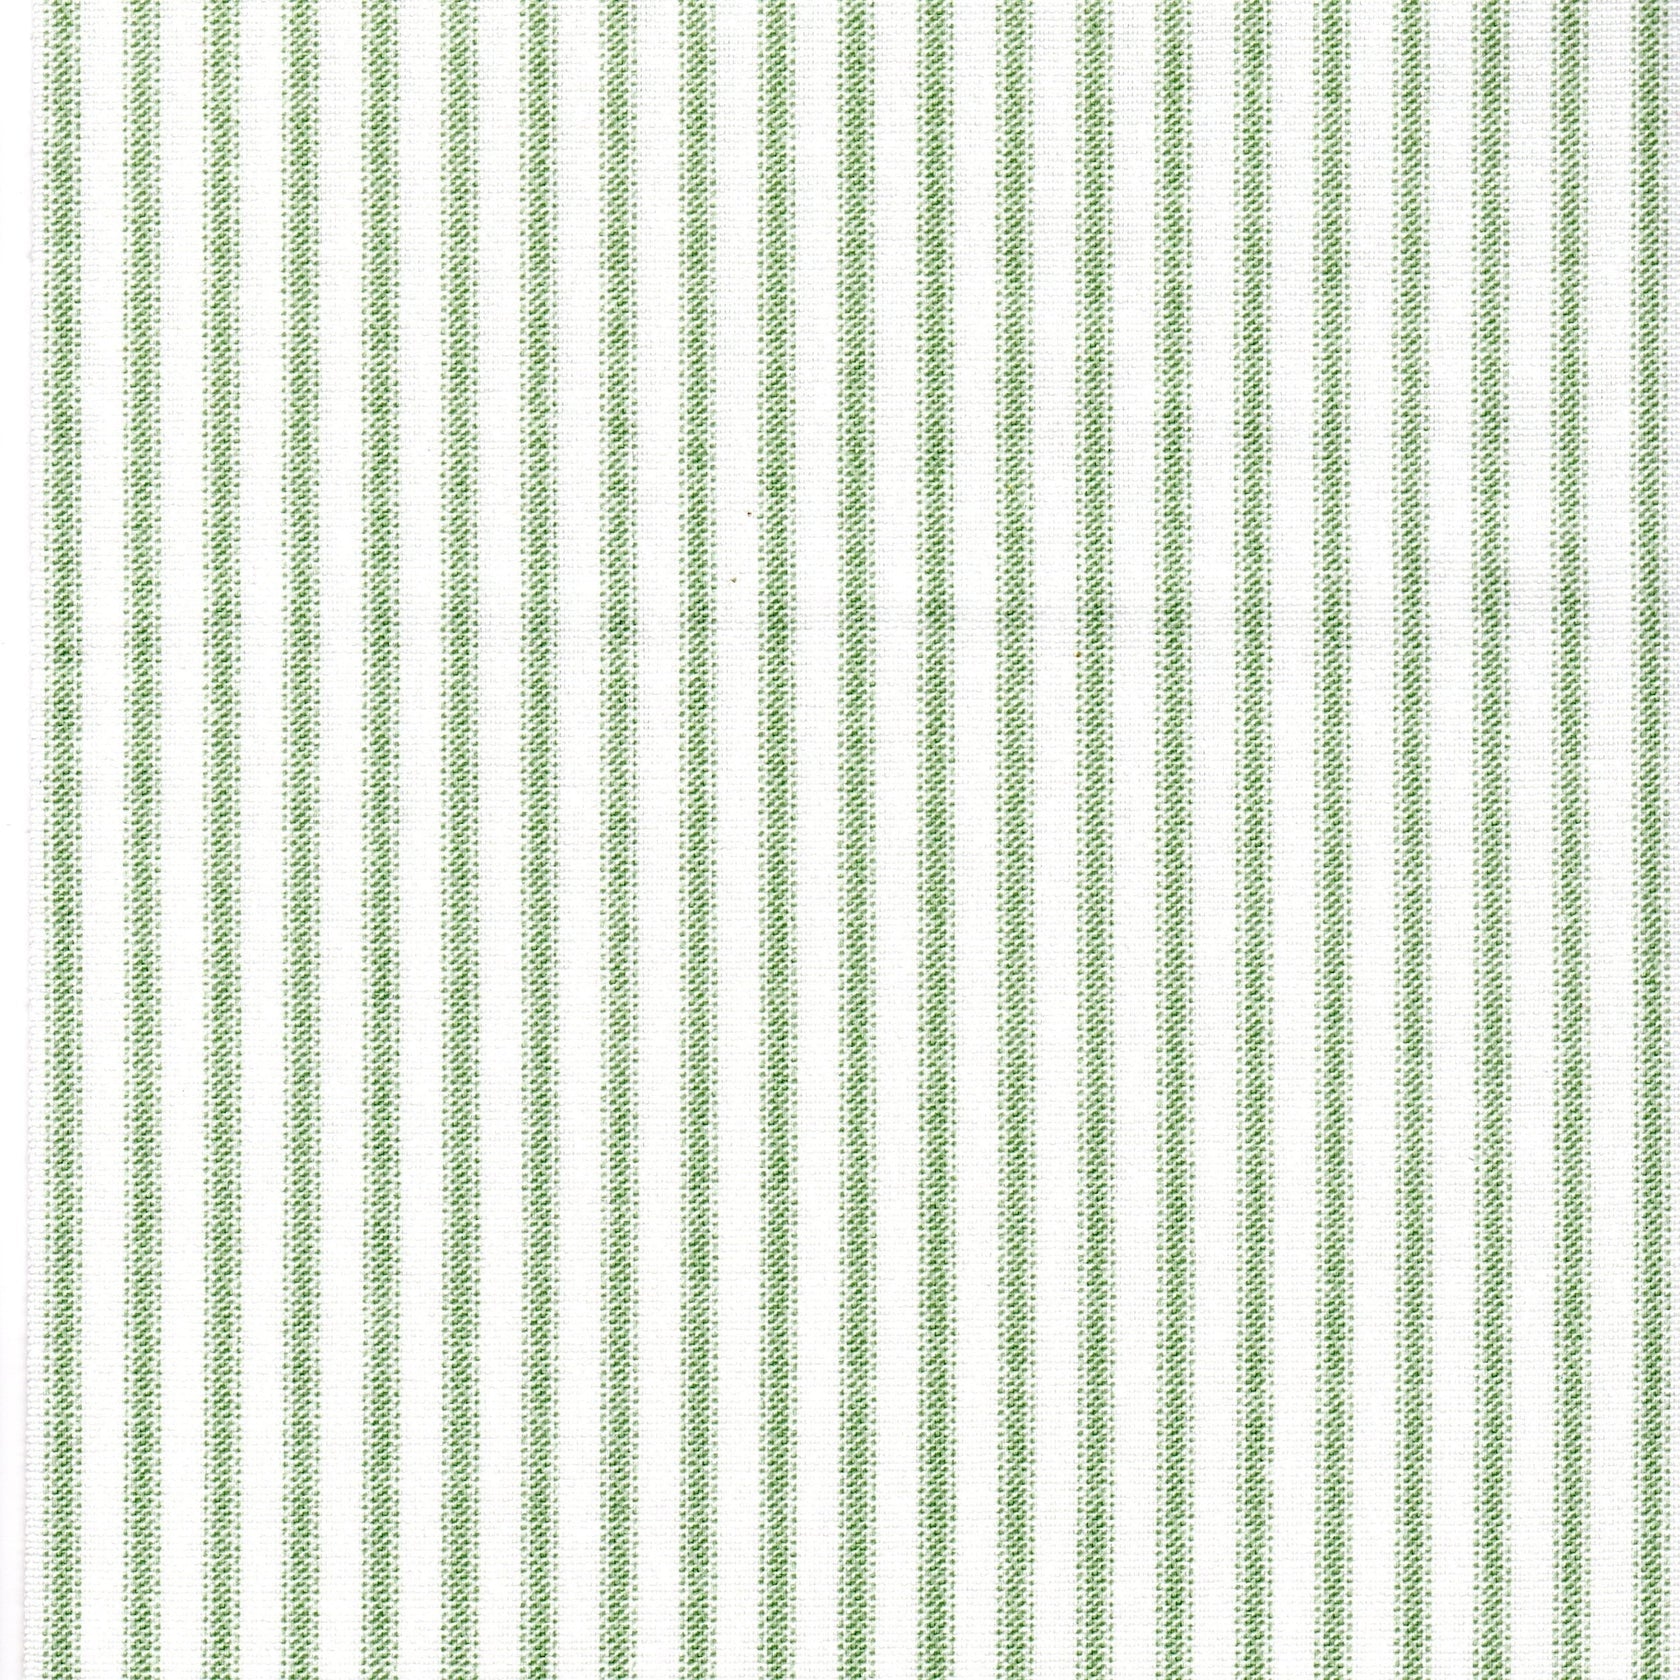 shower curtain in Classic Sage Green Ticking Stripe on White